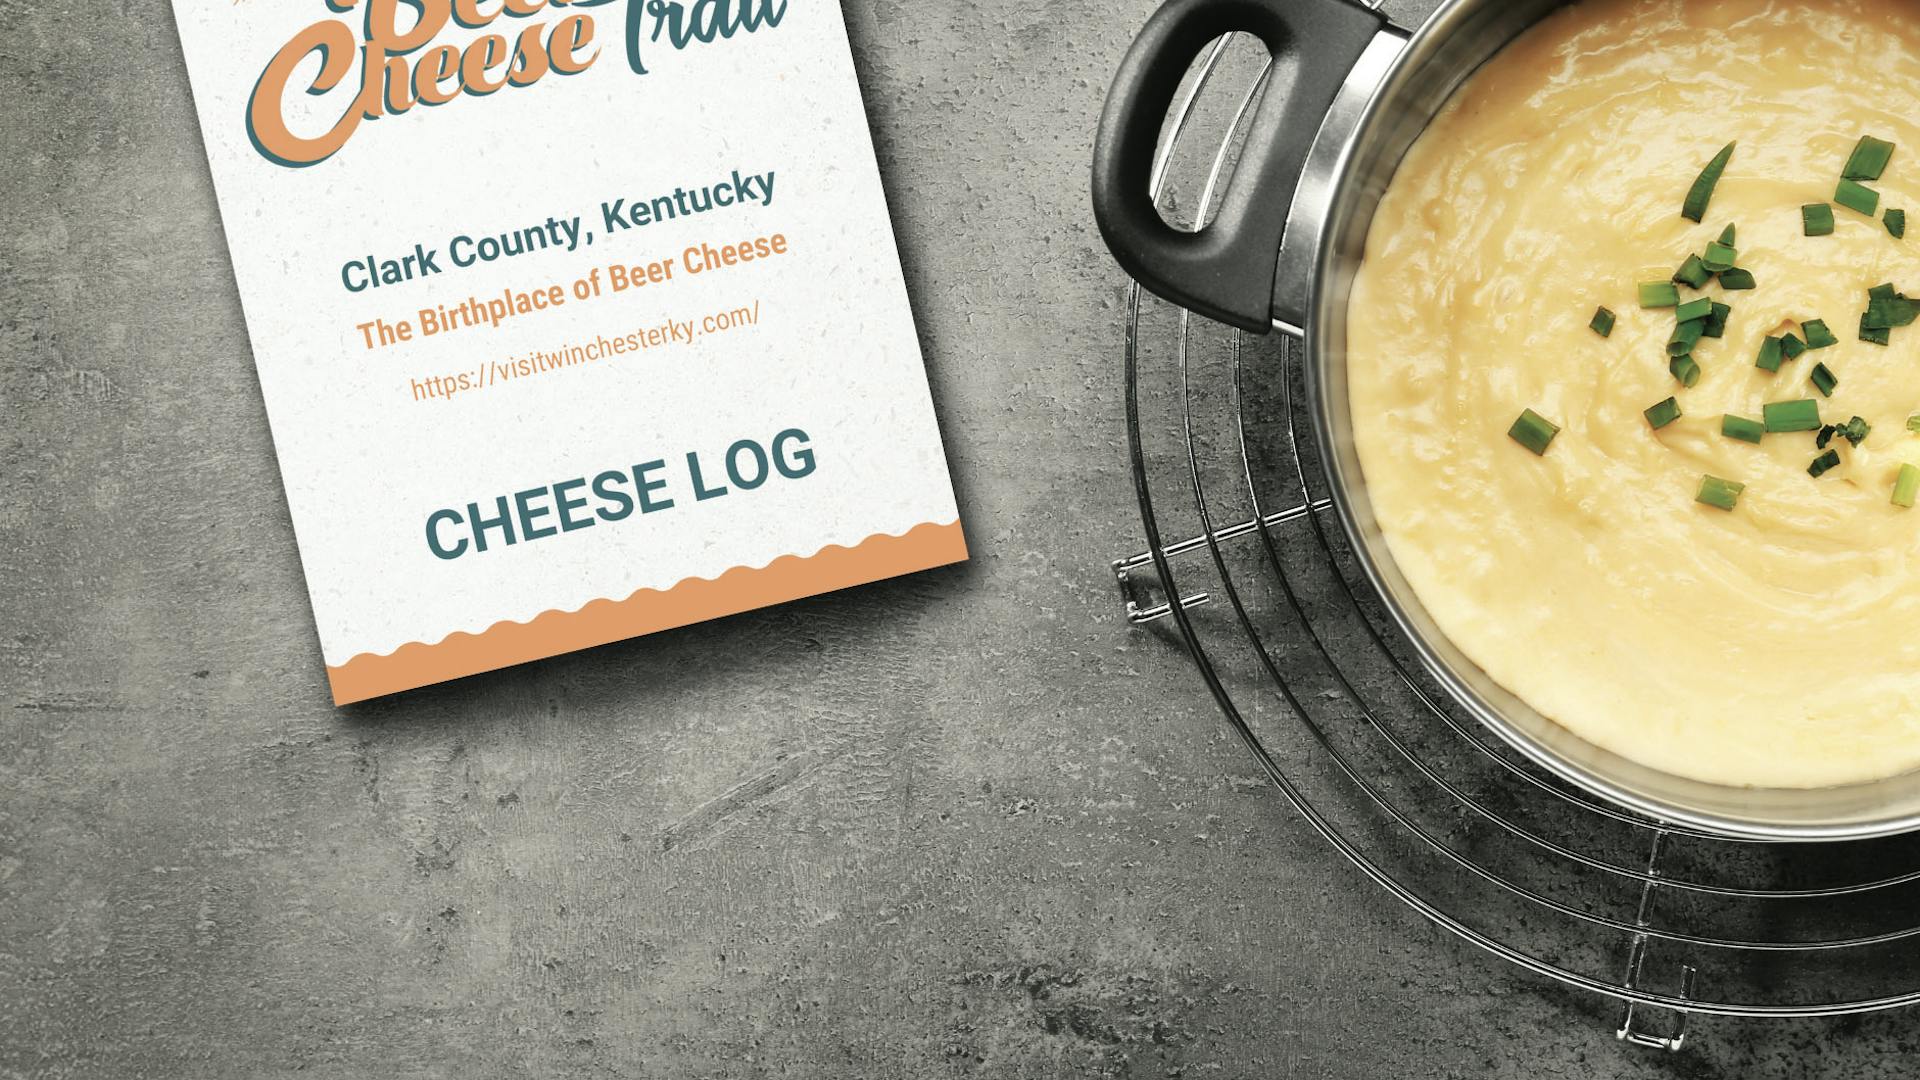 Beer Cheese Trail in Clark County, Kentucky (photo courtesy of Winchester-Clark County Tourism Commission)